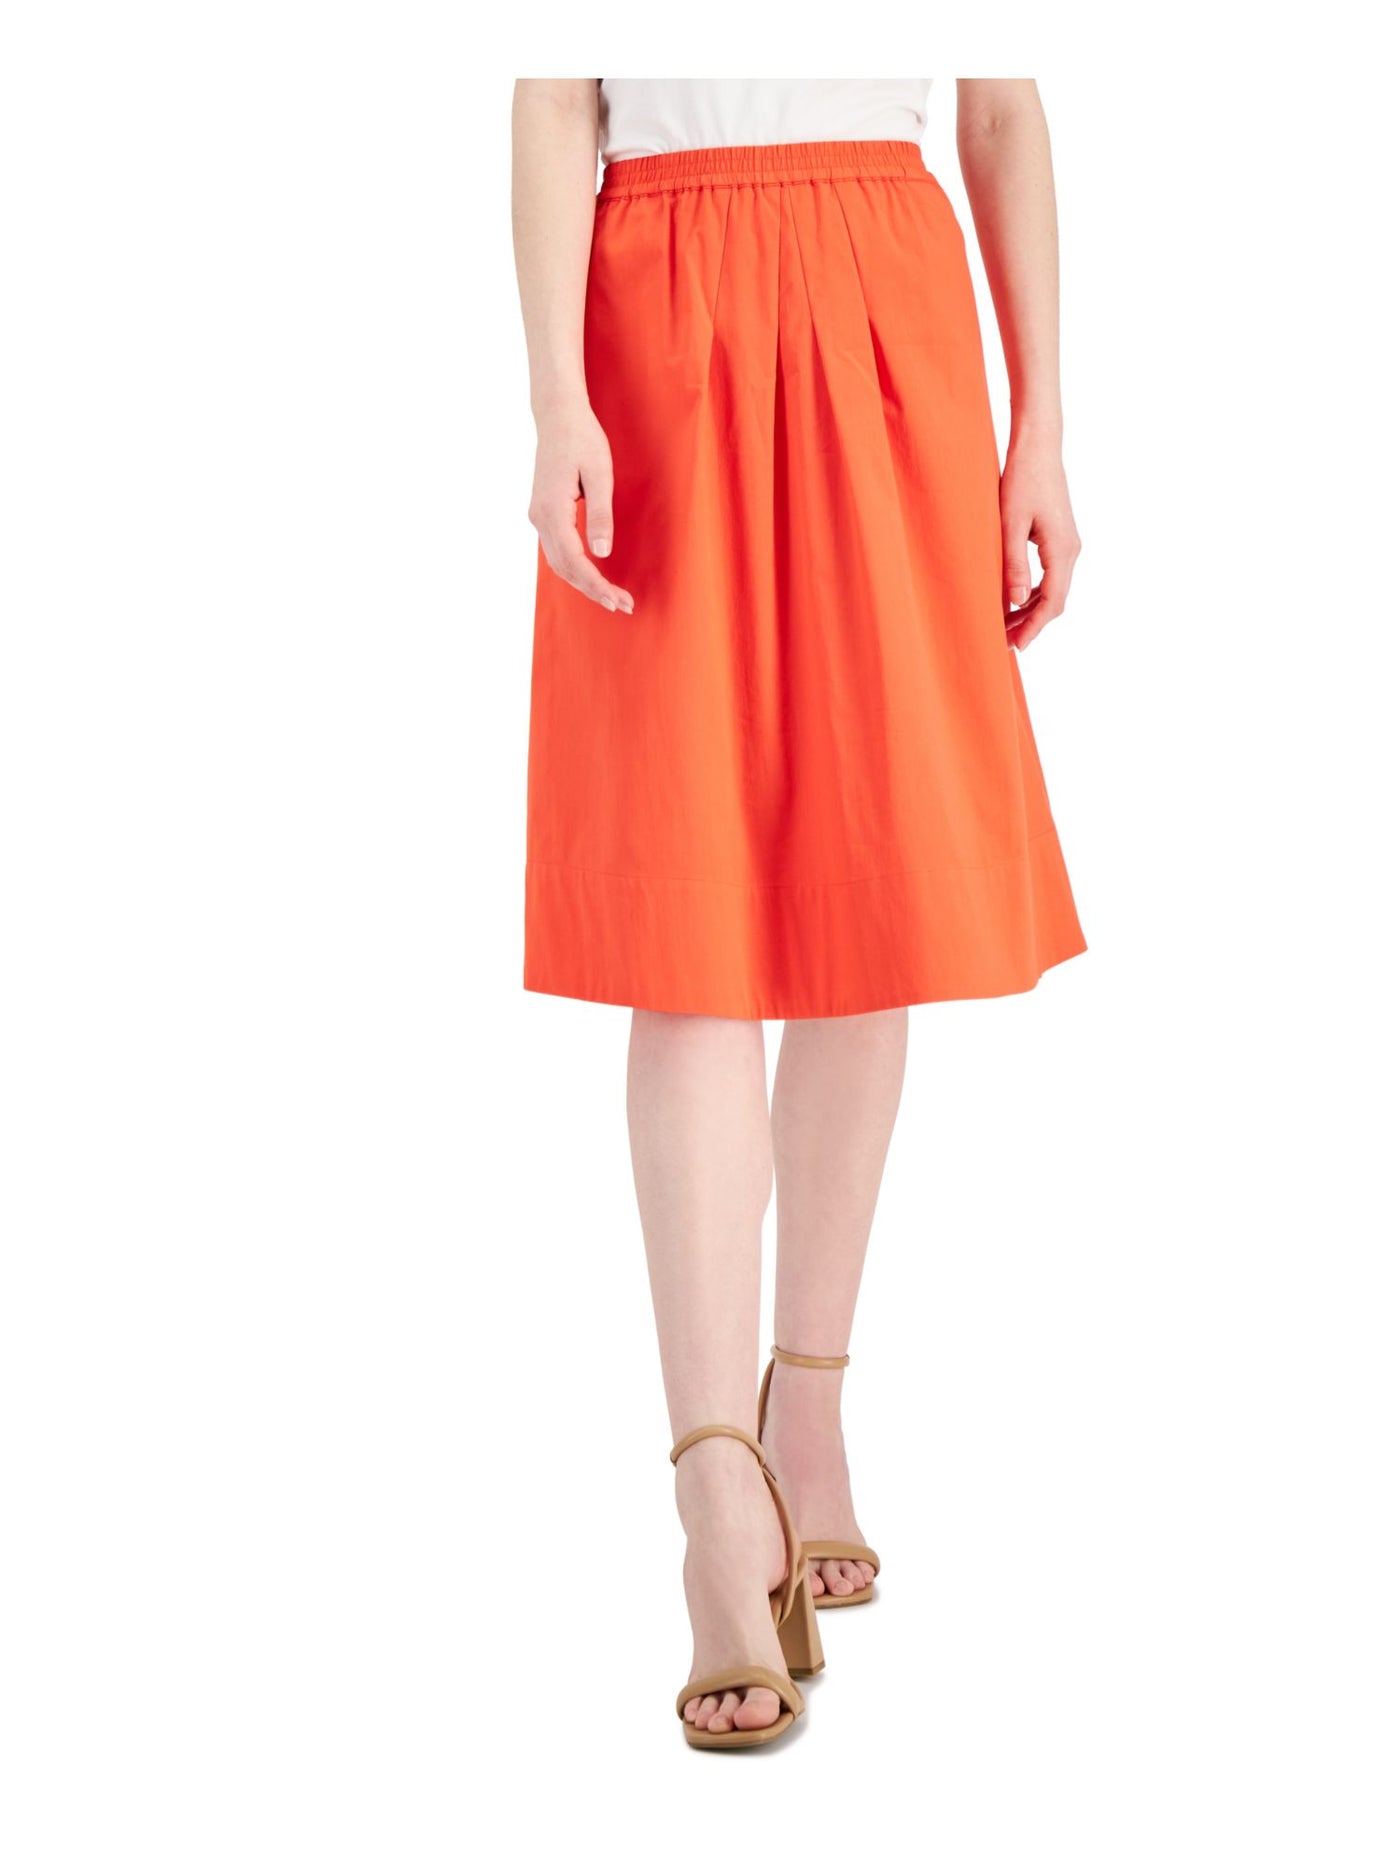 DONNA KARAN NEW YORK Womens Orange Pocketed Lined Elastic Waist Pull On Pleated Below The Knee A-Line Skirt L